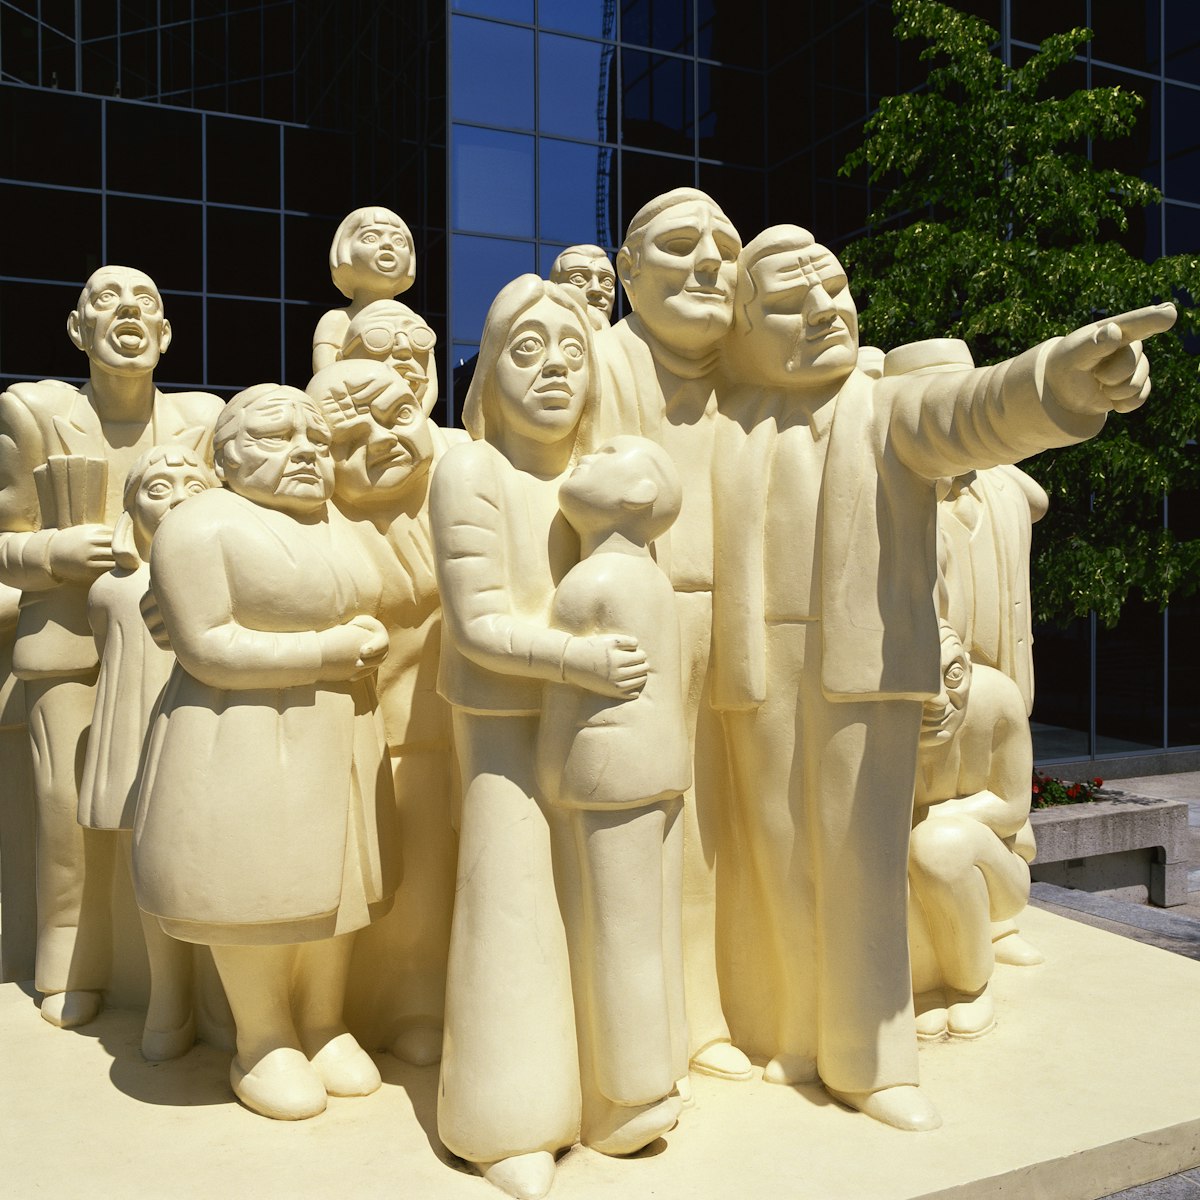 The Illuminated Crowd Sculpture in front of BNP Building, Montreal, Quebec, Canada